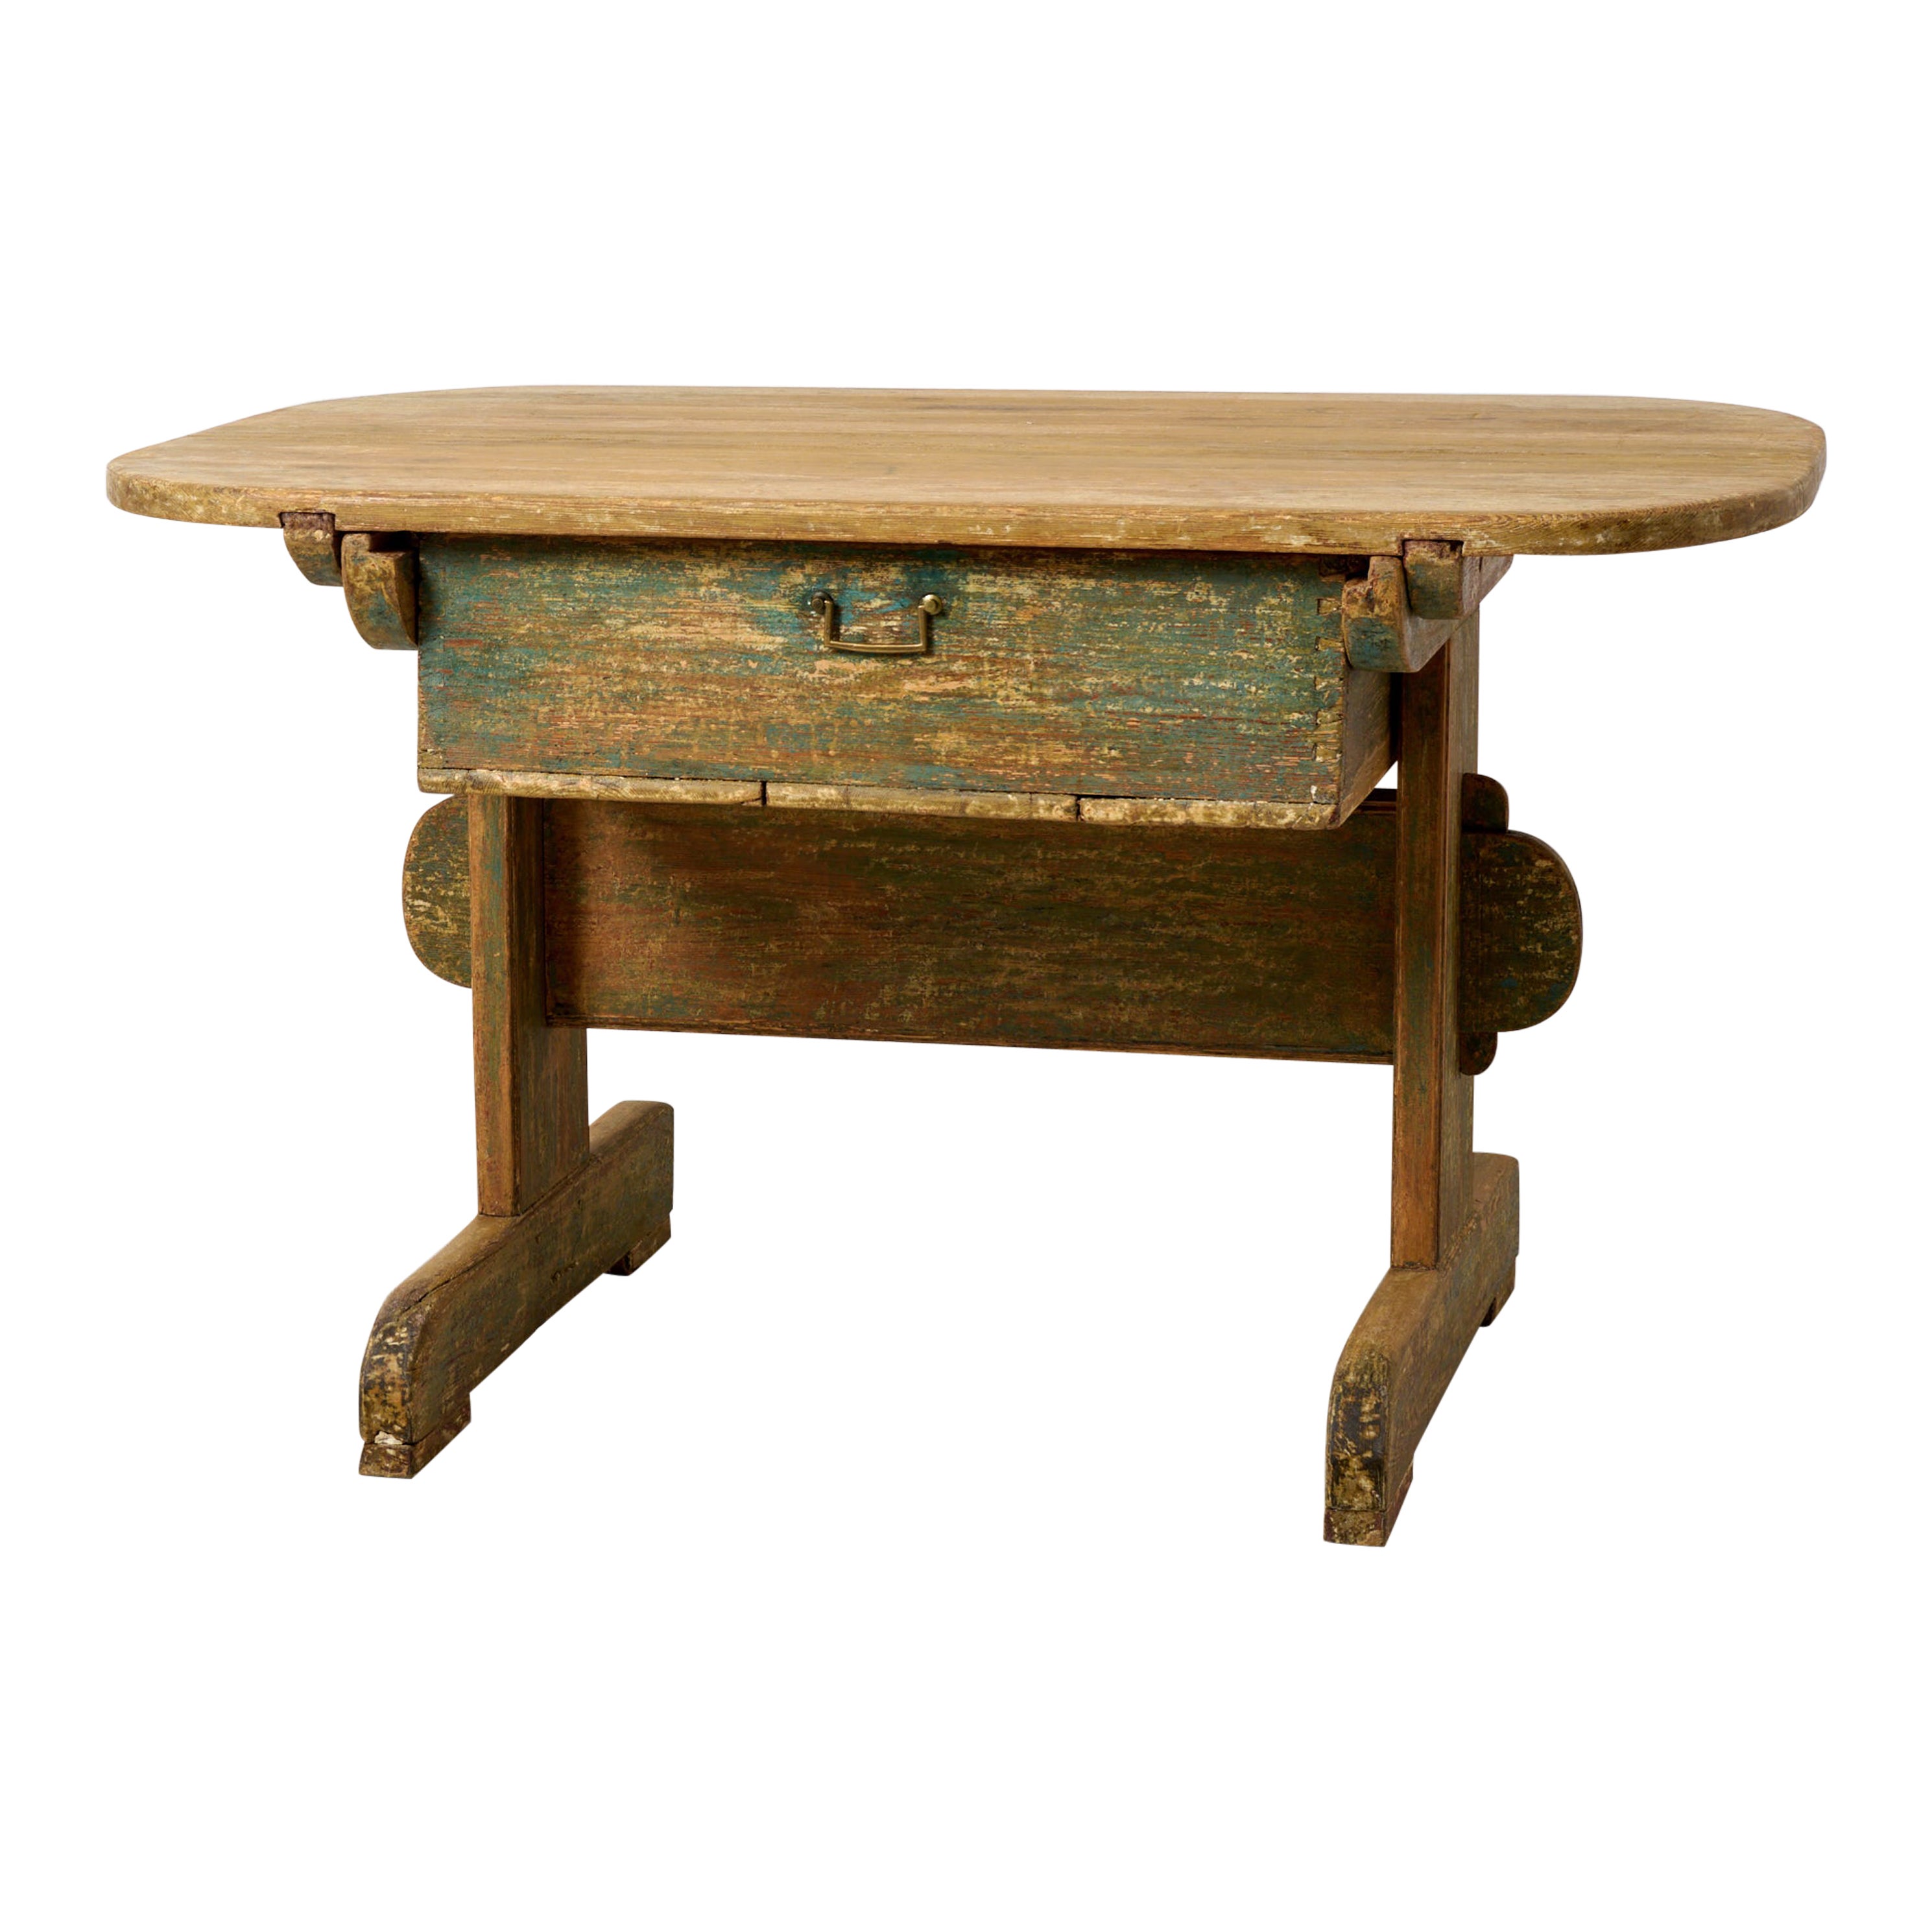 Antique Genuine Rare Unique Charming Northern Swedish Country Table with Drawer For Sale